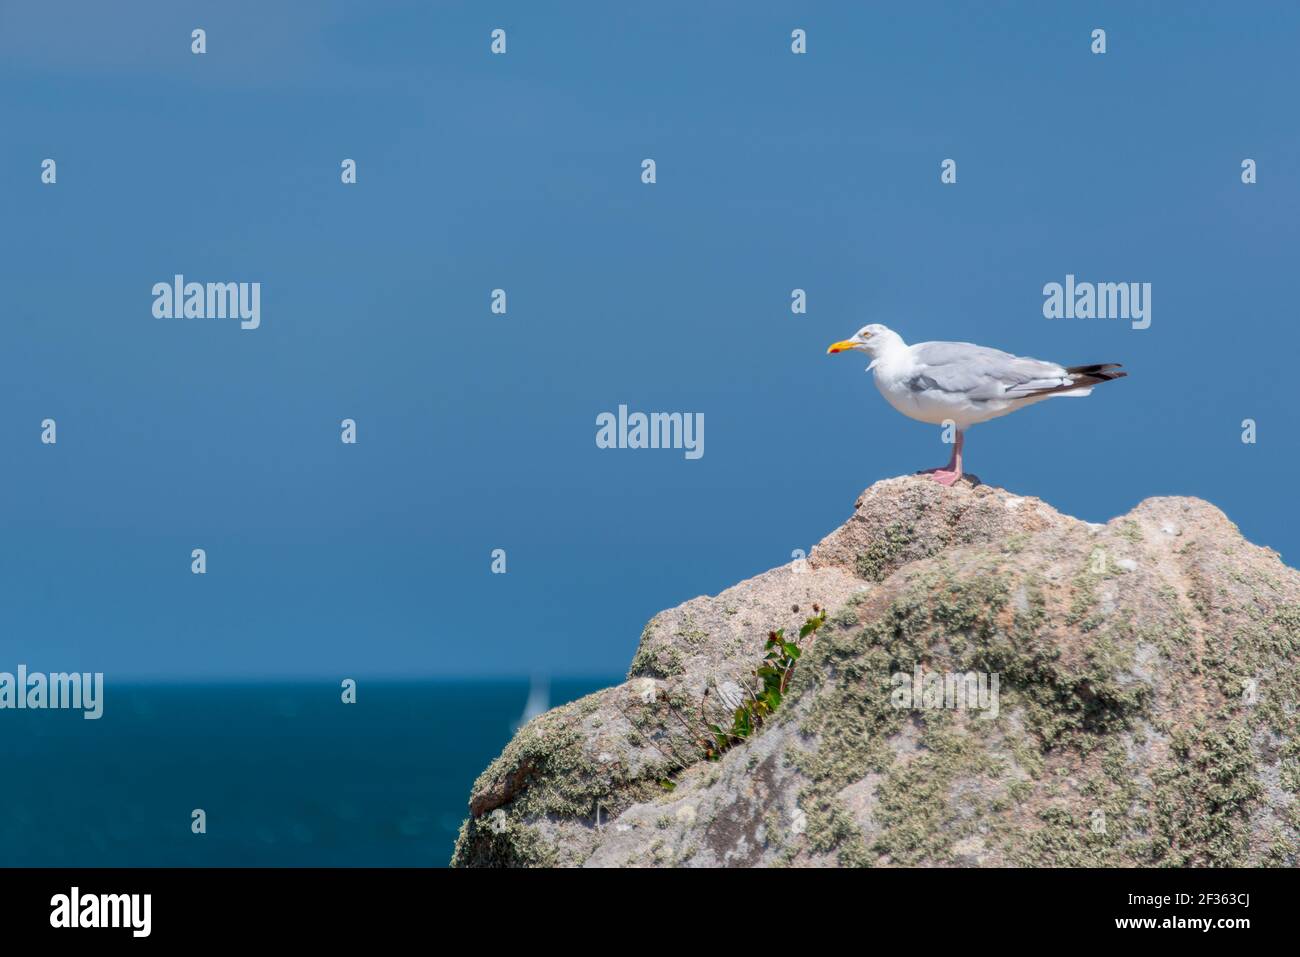 Seagull on a rock on blue sky background Stock Photo